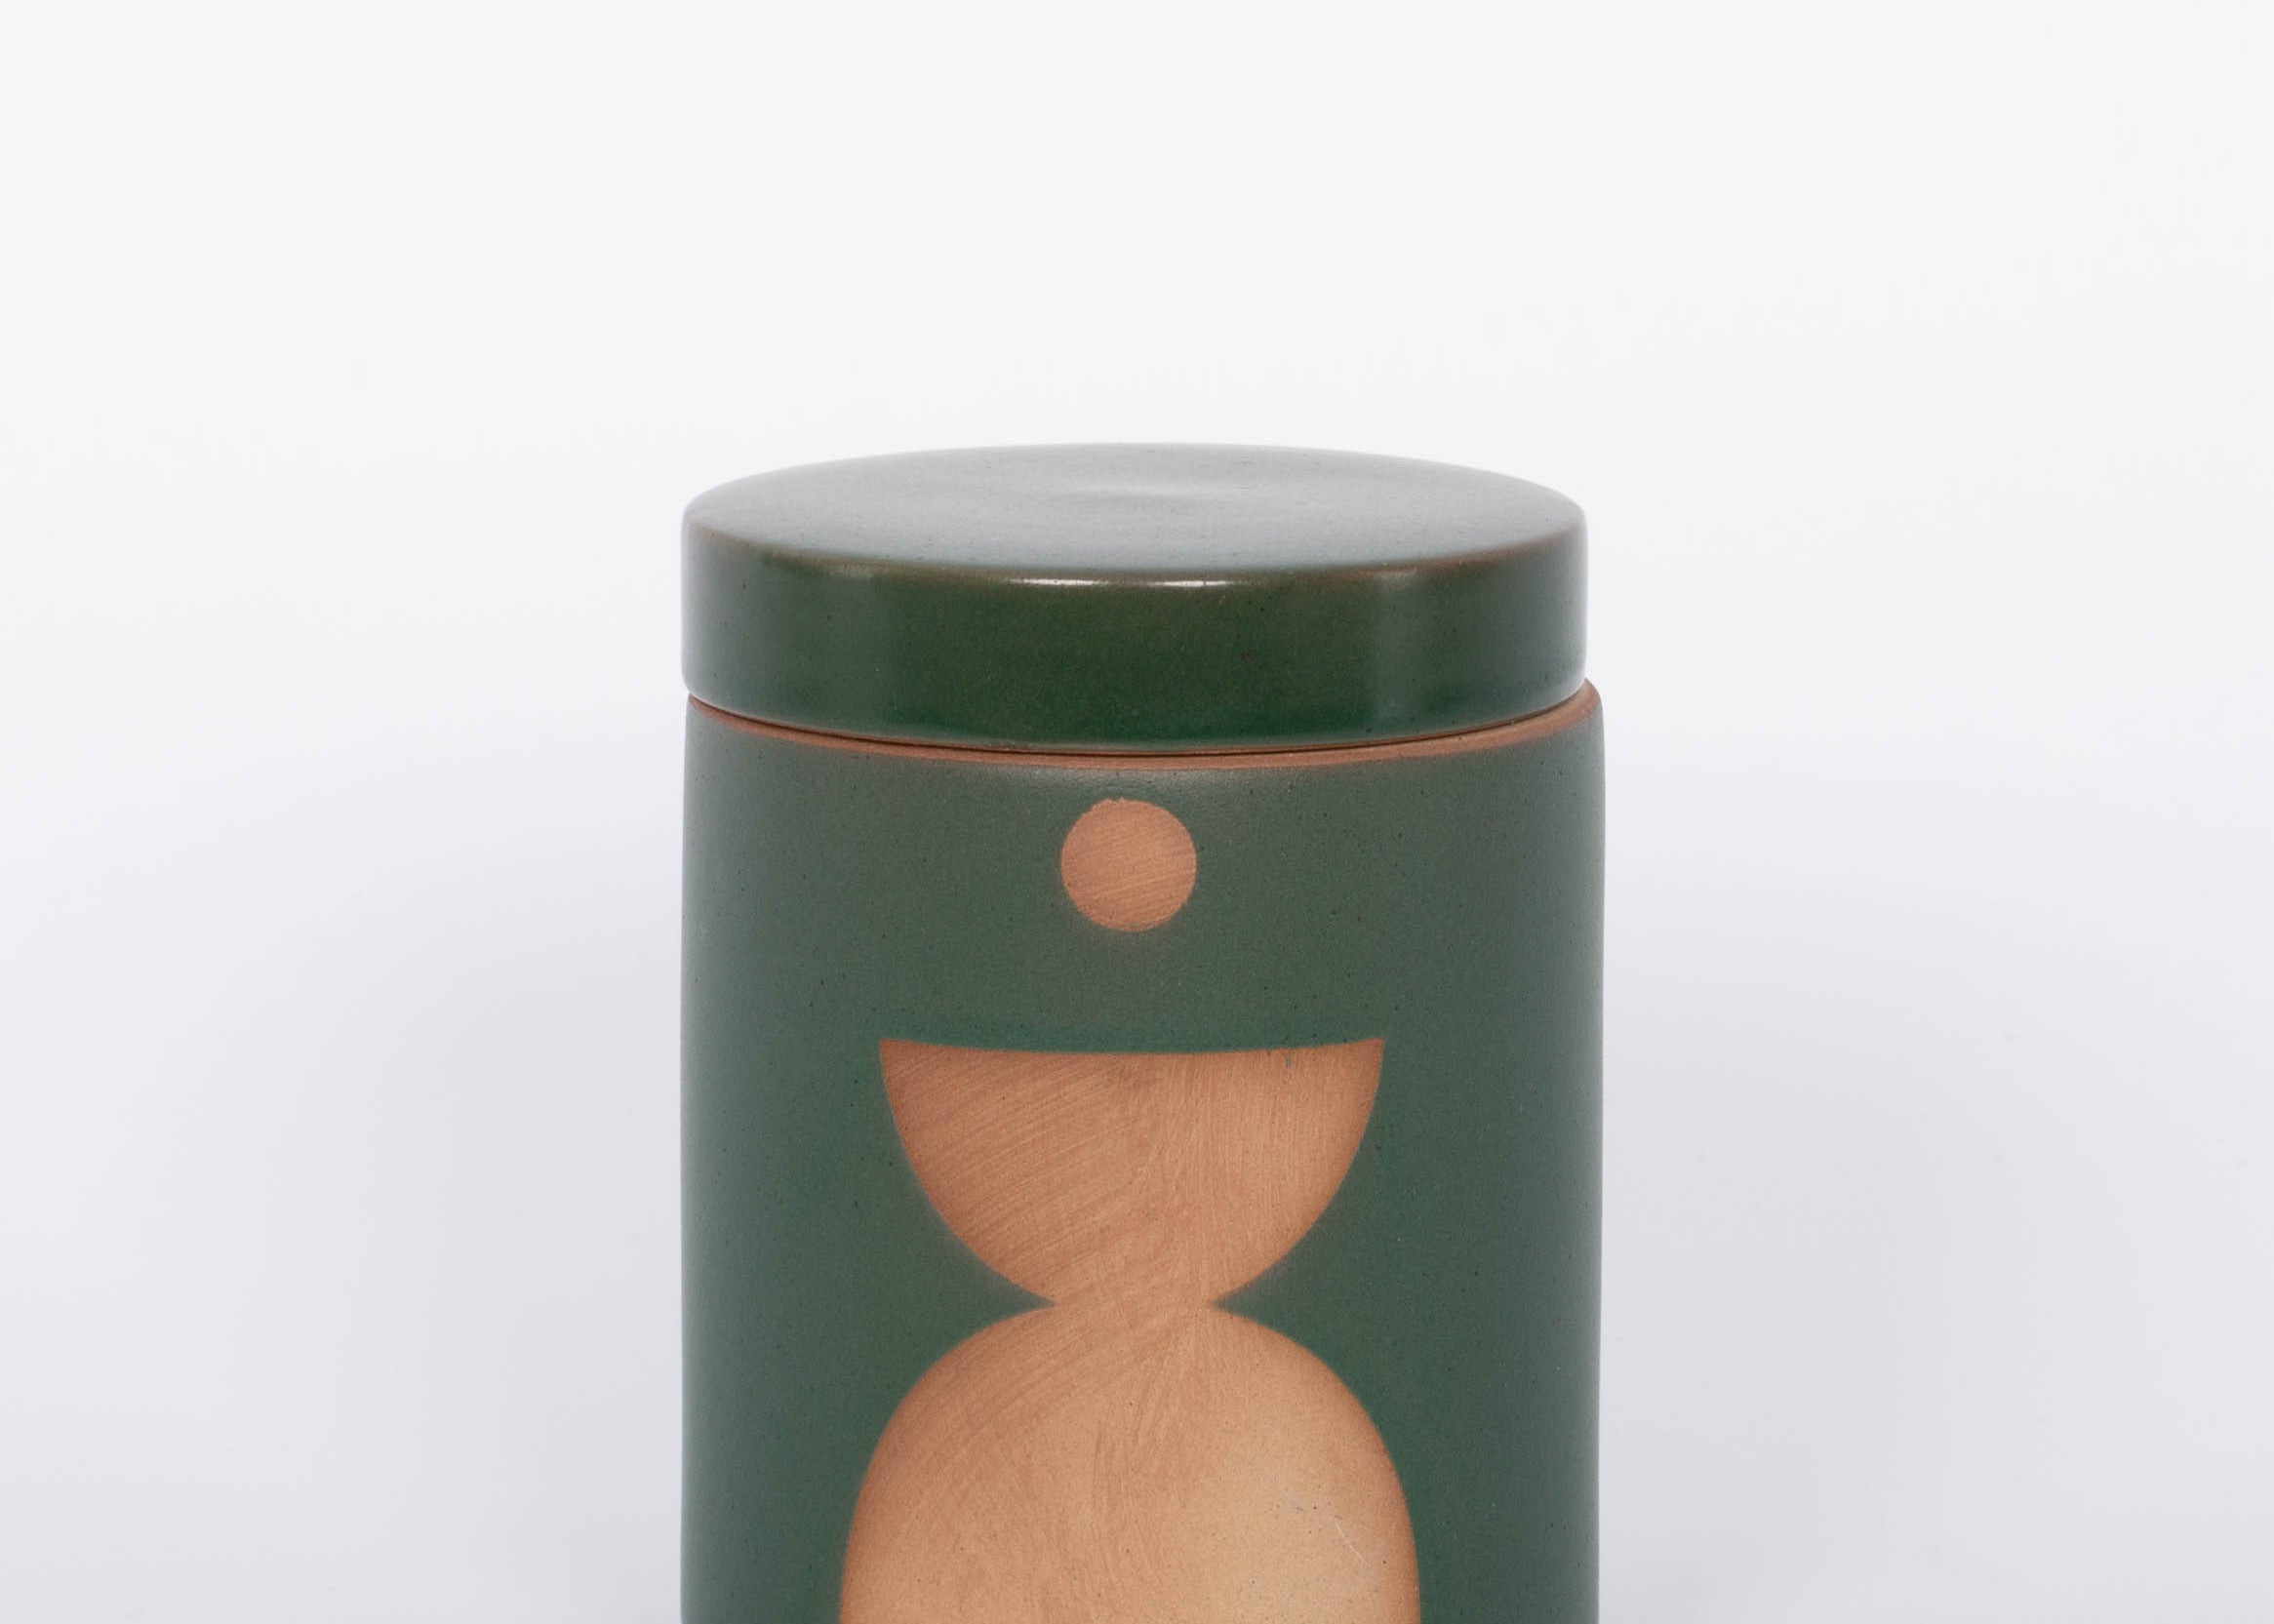 Spanish Moss Candle. Dark green and earth brown. Ceramic vessel with raw block shape and hole in bottom, serves as a perfect planter after candle is used up. 